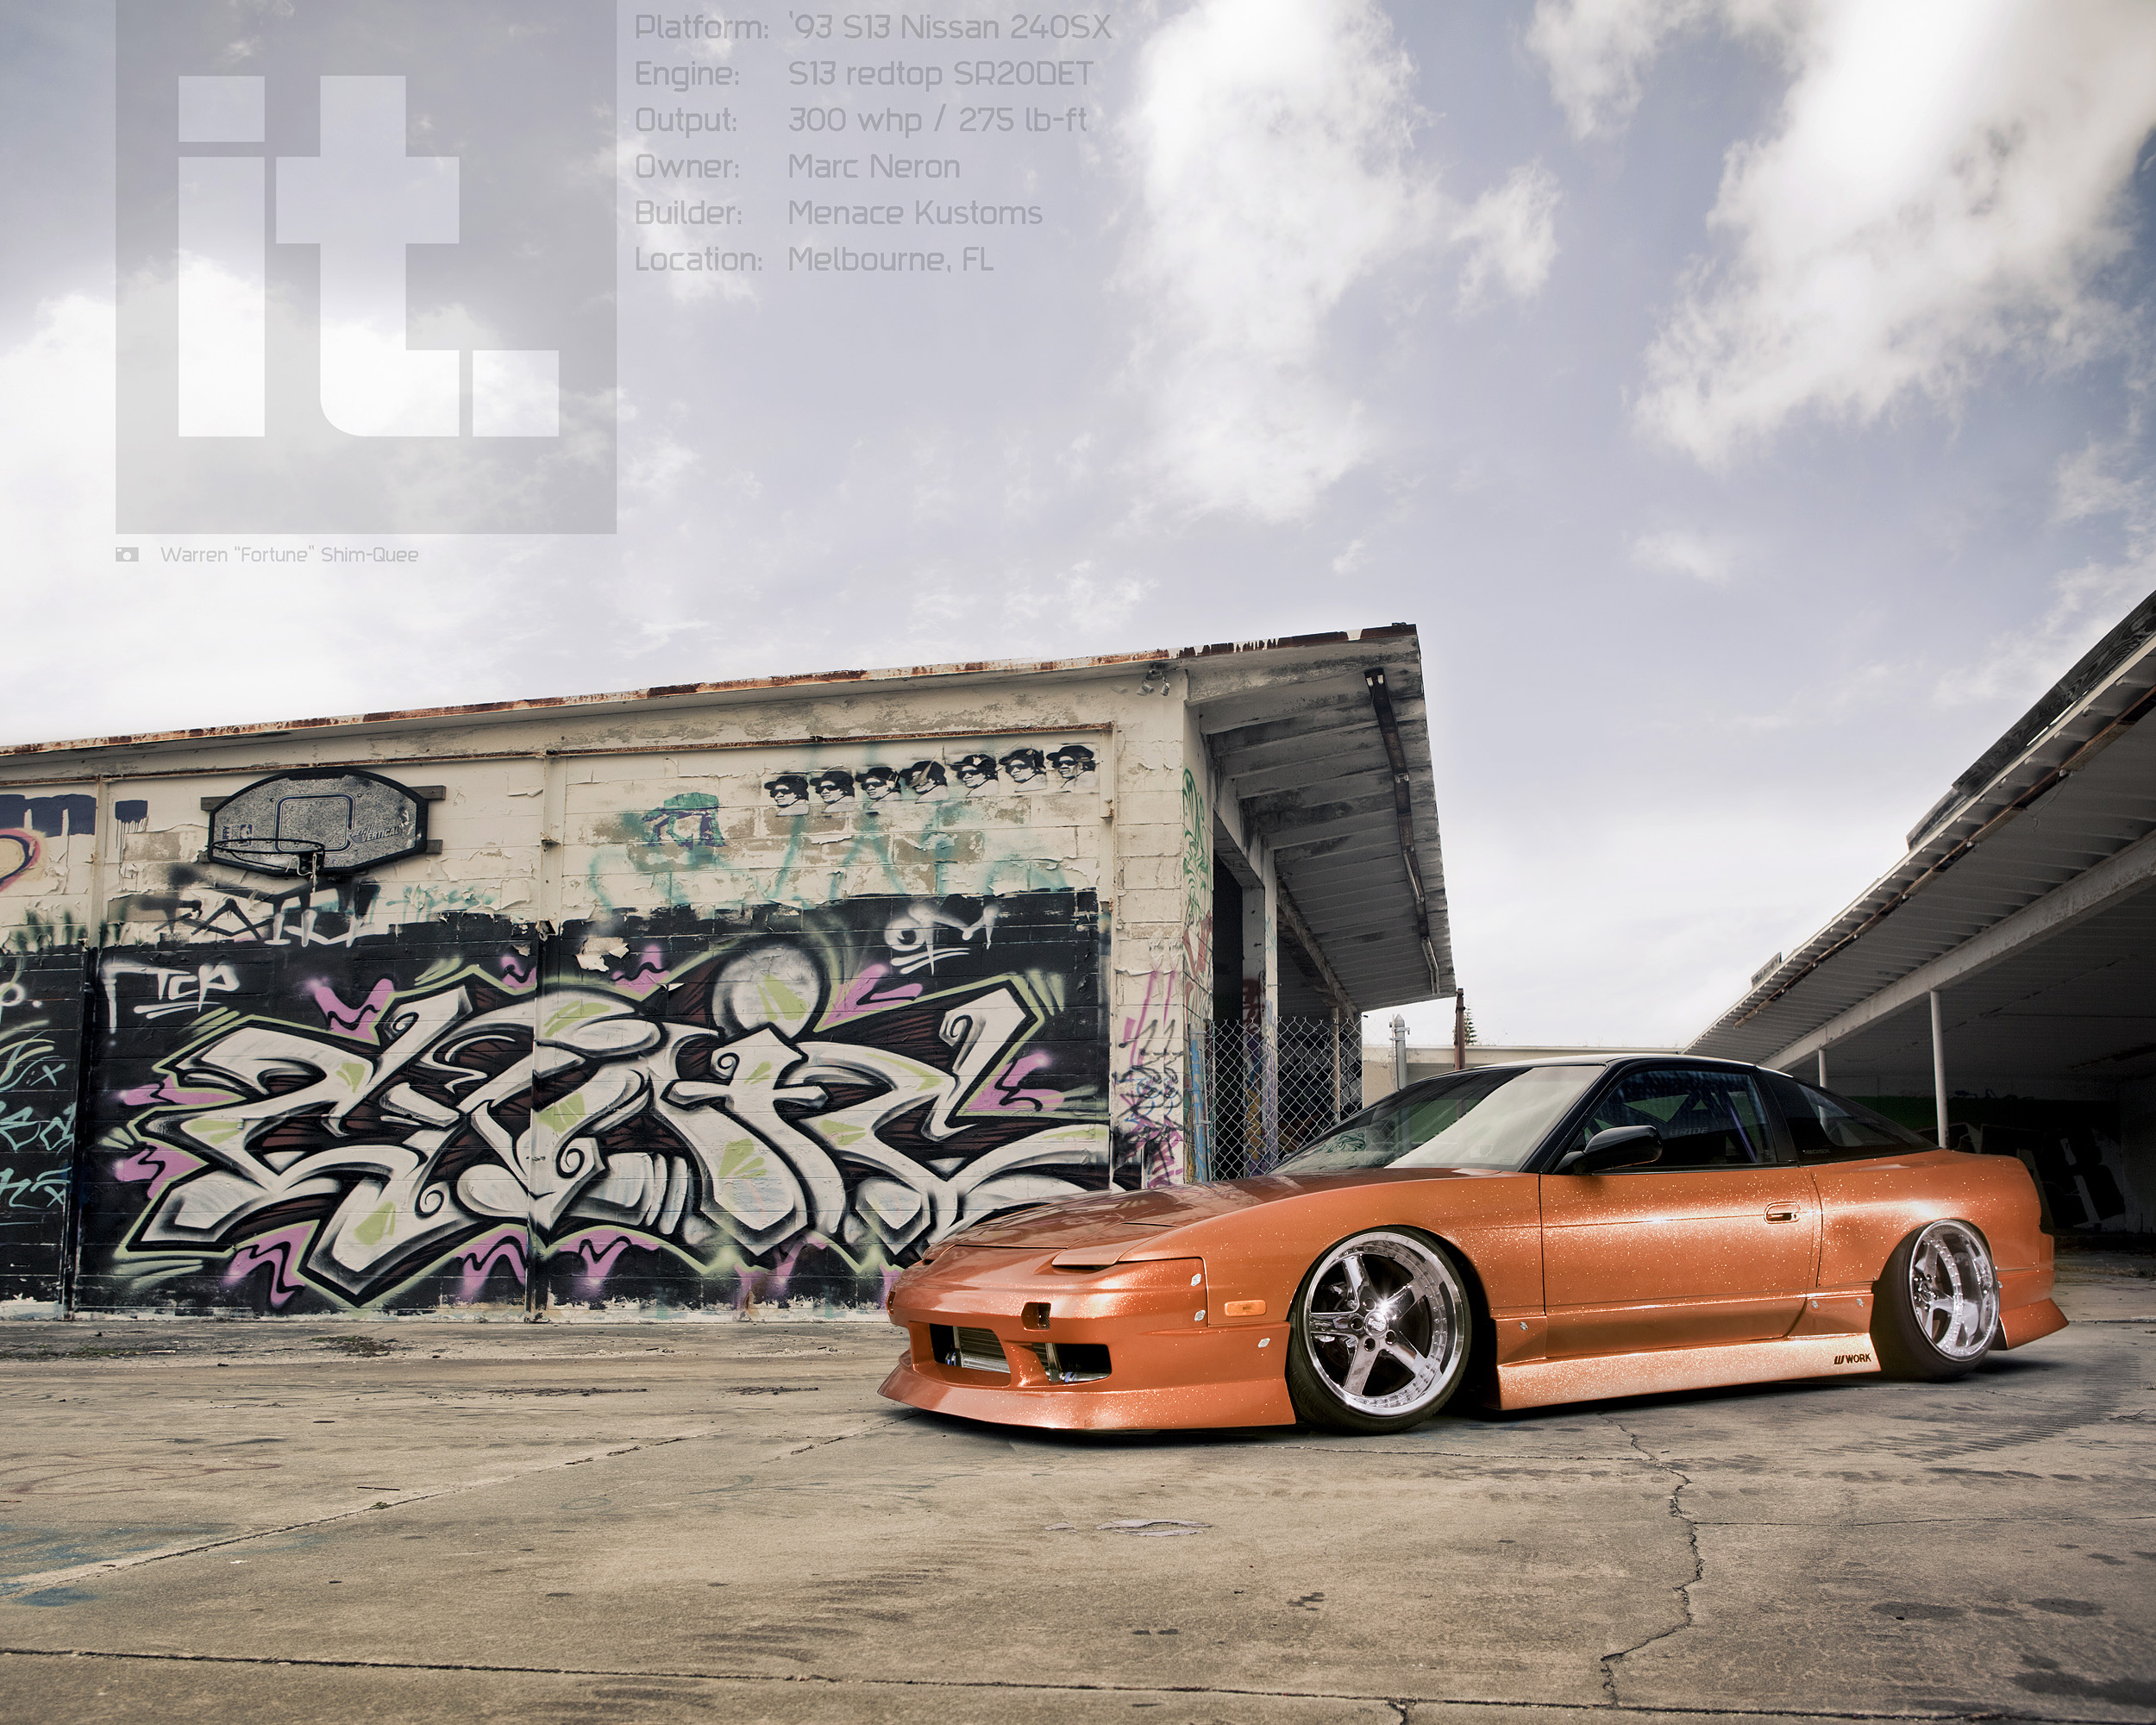 Nissan 240sx S13 Wallpaper Image Pictures Becuo